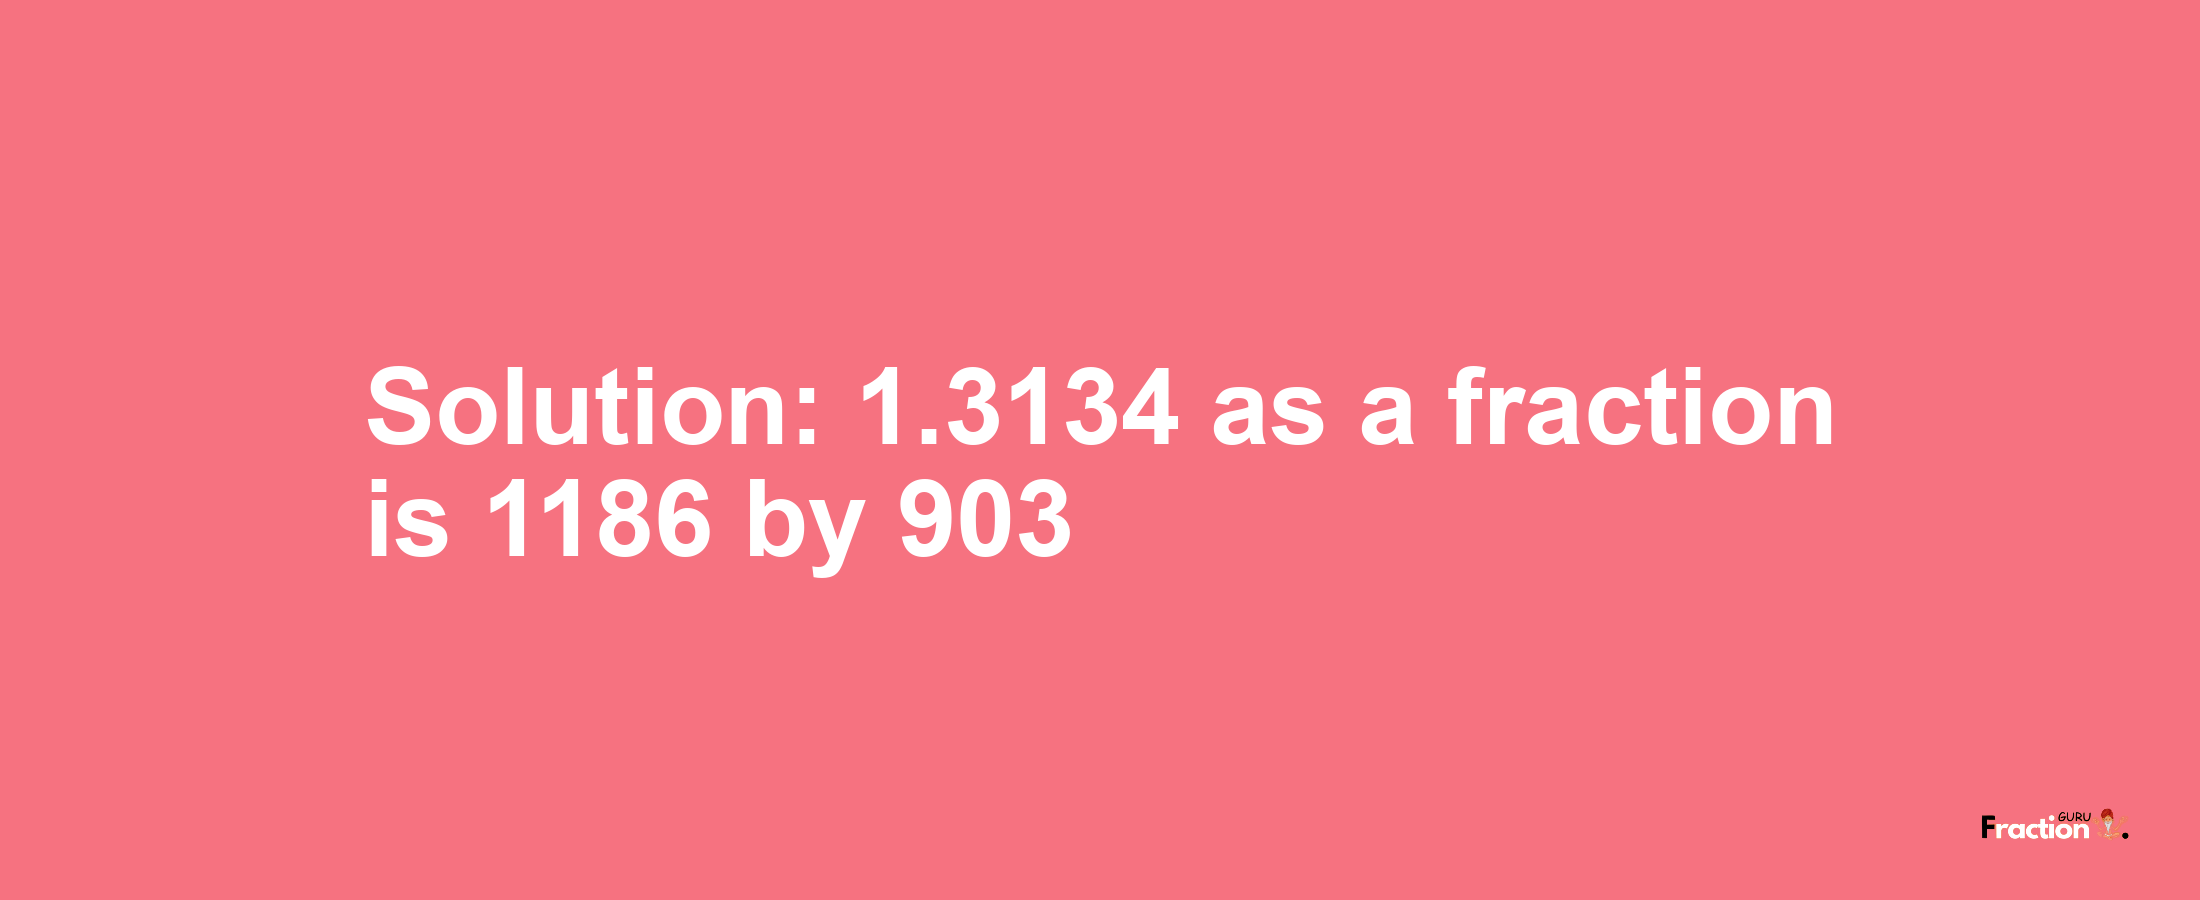 Solution:1.3134 as a fraction is 1186/903